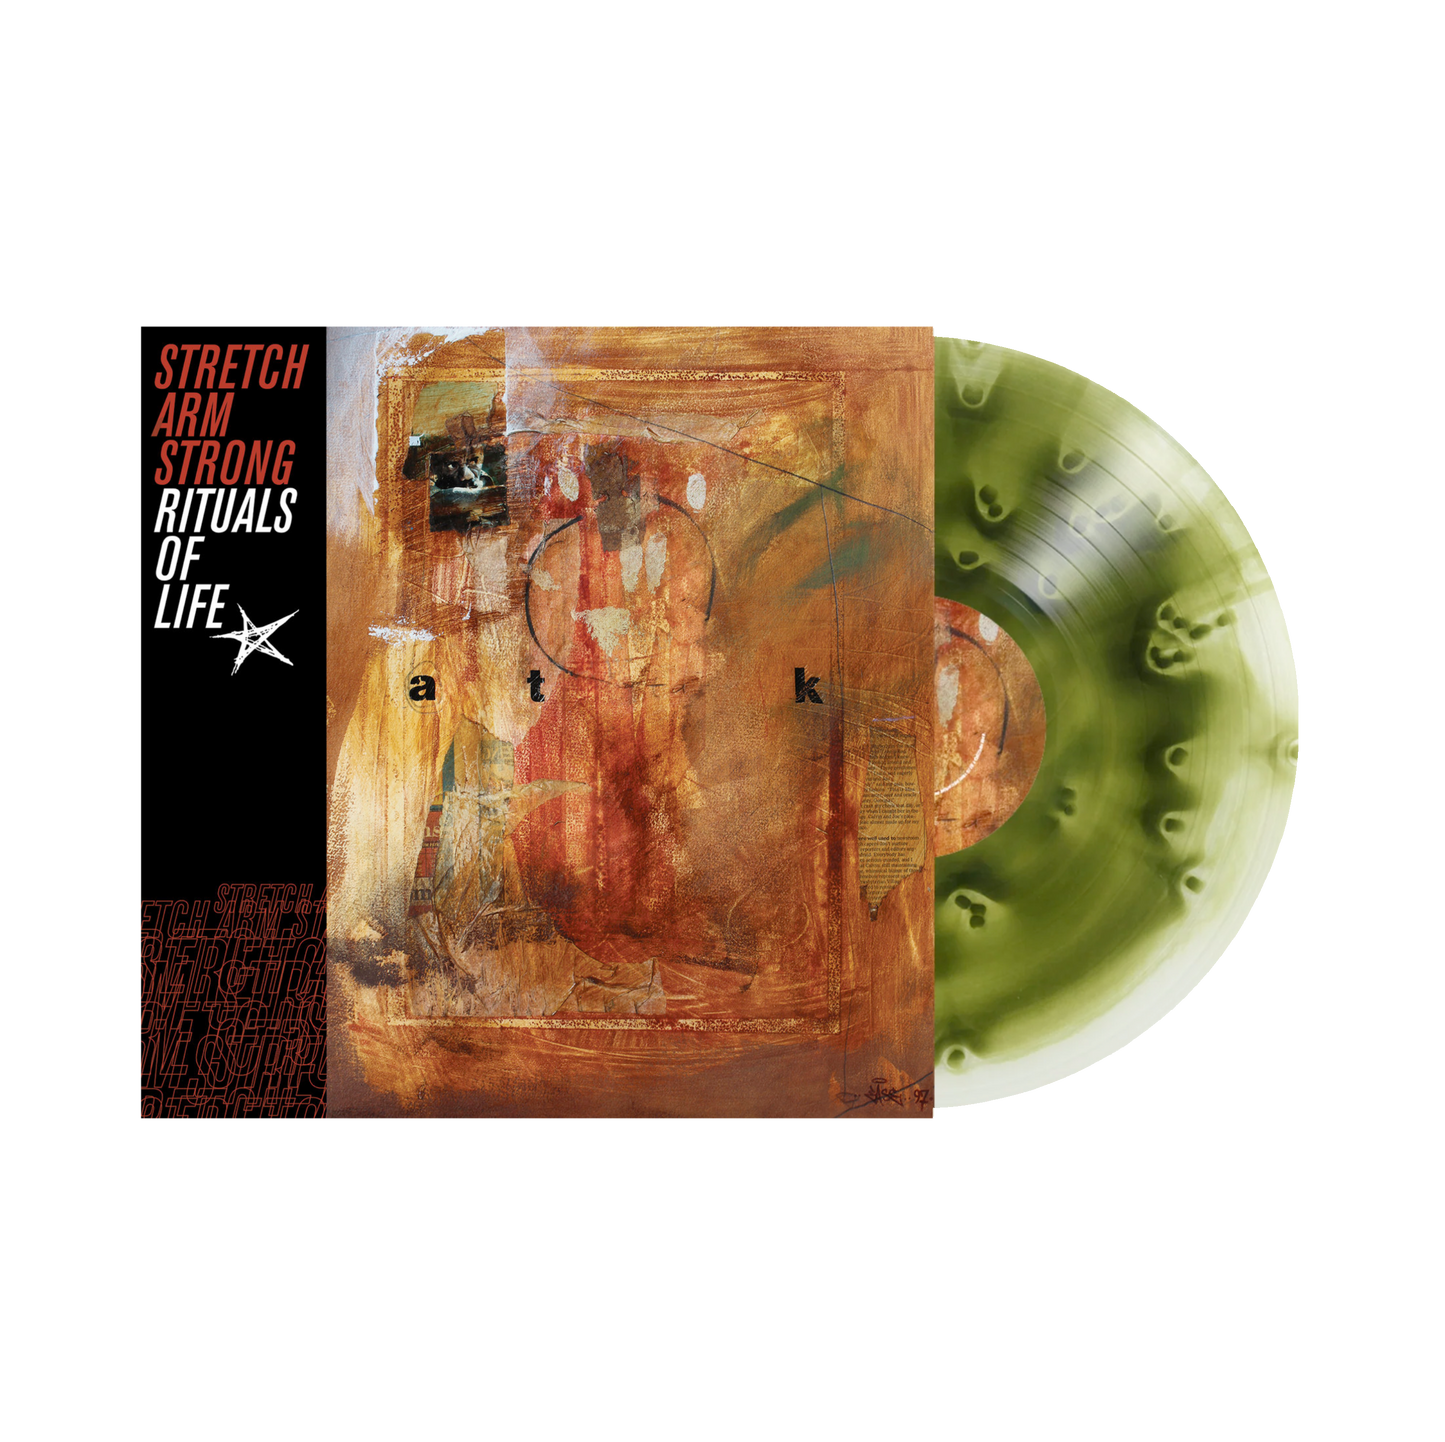 Stretch Arm Strong  "Rituals Of Life" LP